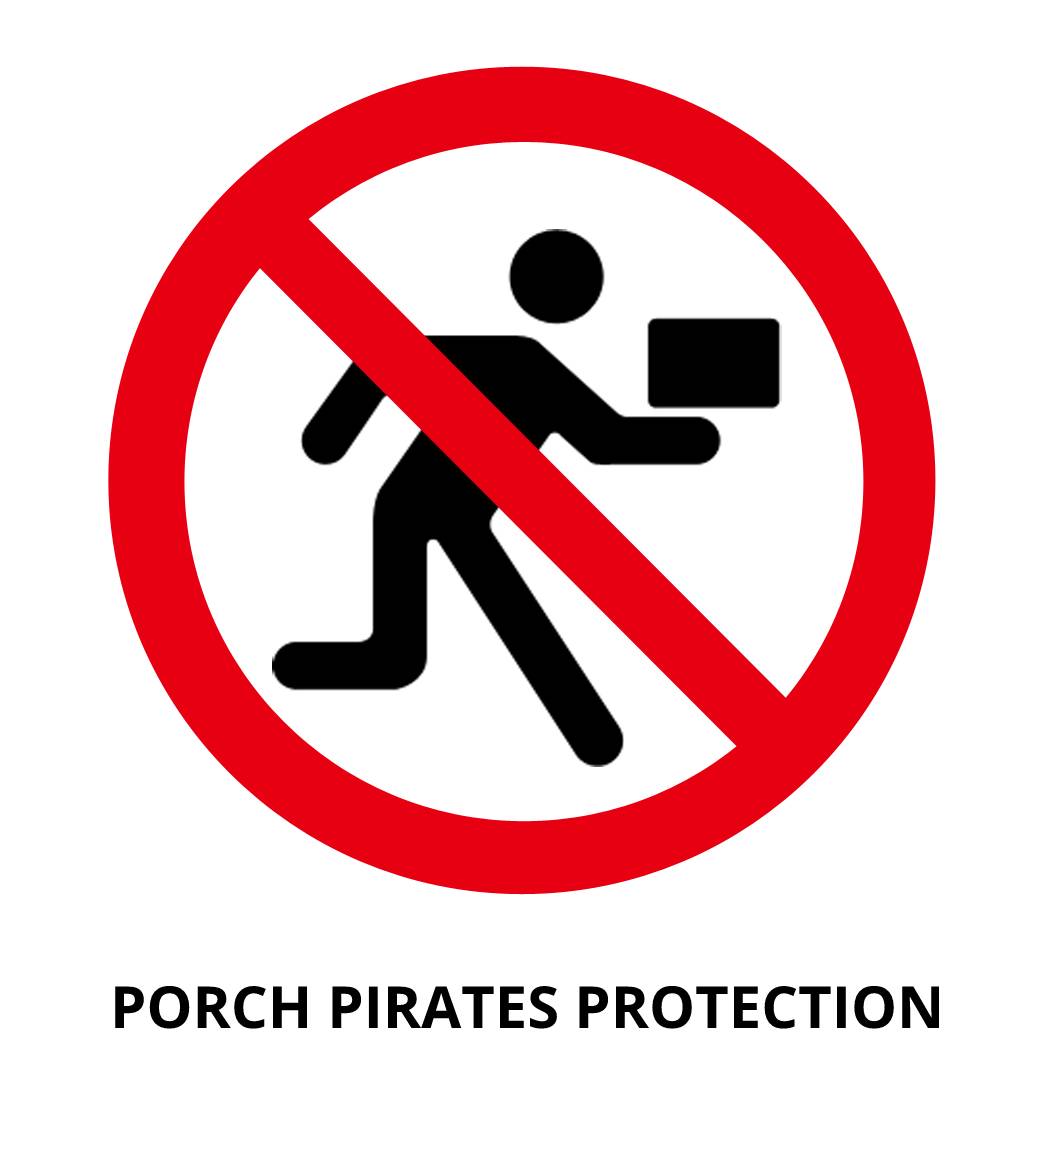 Porch Pirates Protection (rcp)